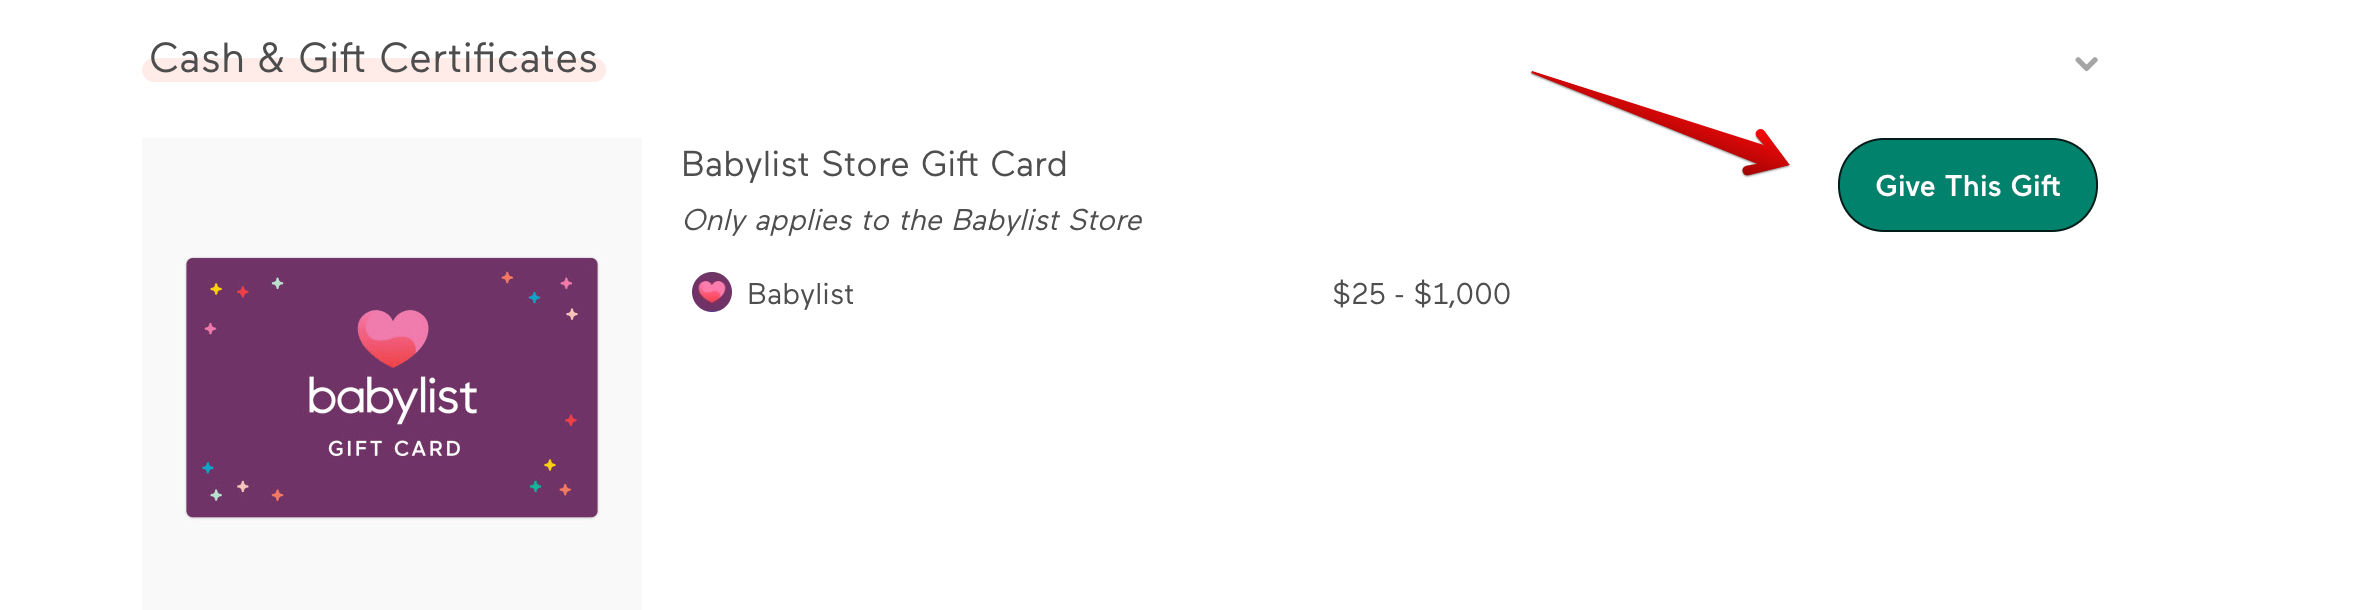 gift_card_give_this_gift.png